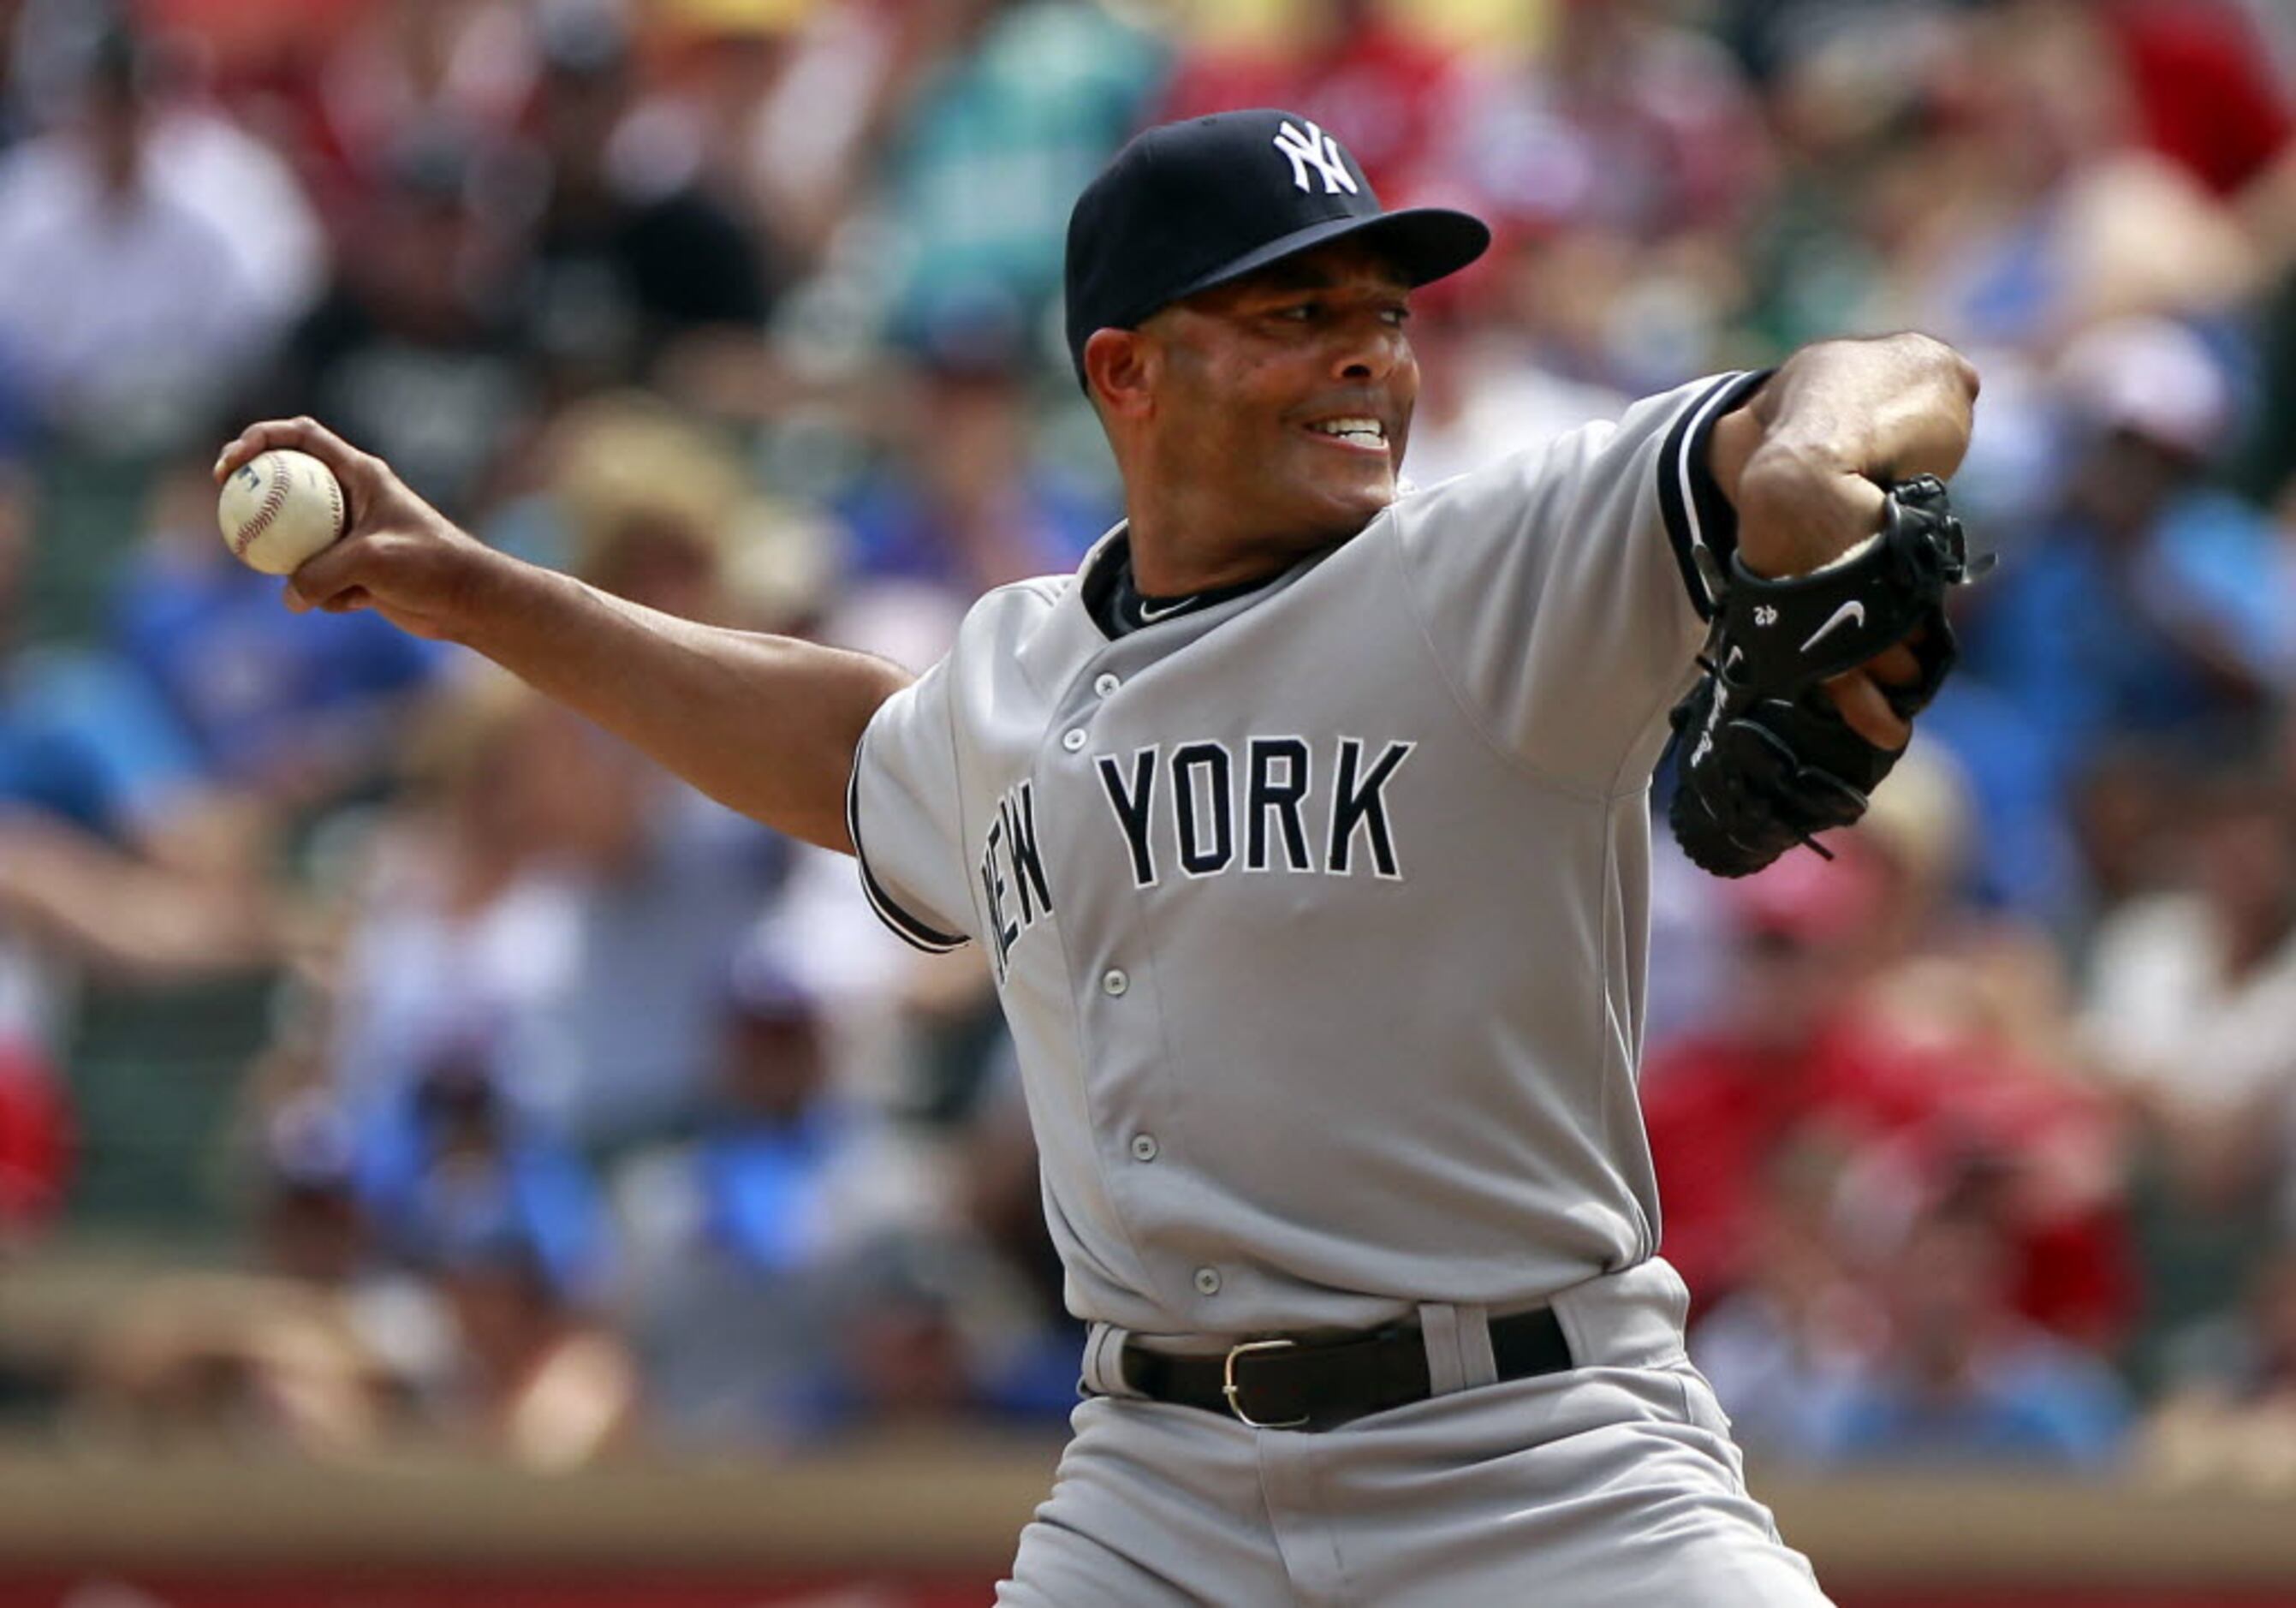 Mariano Rivera becomes first player to be elected unanimously to Baseball  Hall of Fame; see full 2019 class here